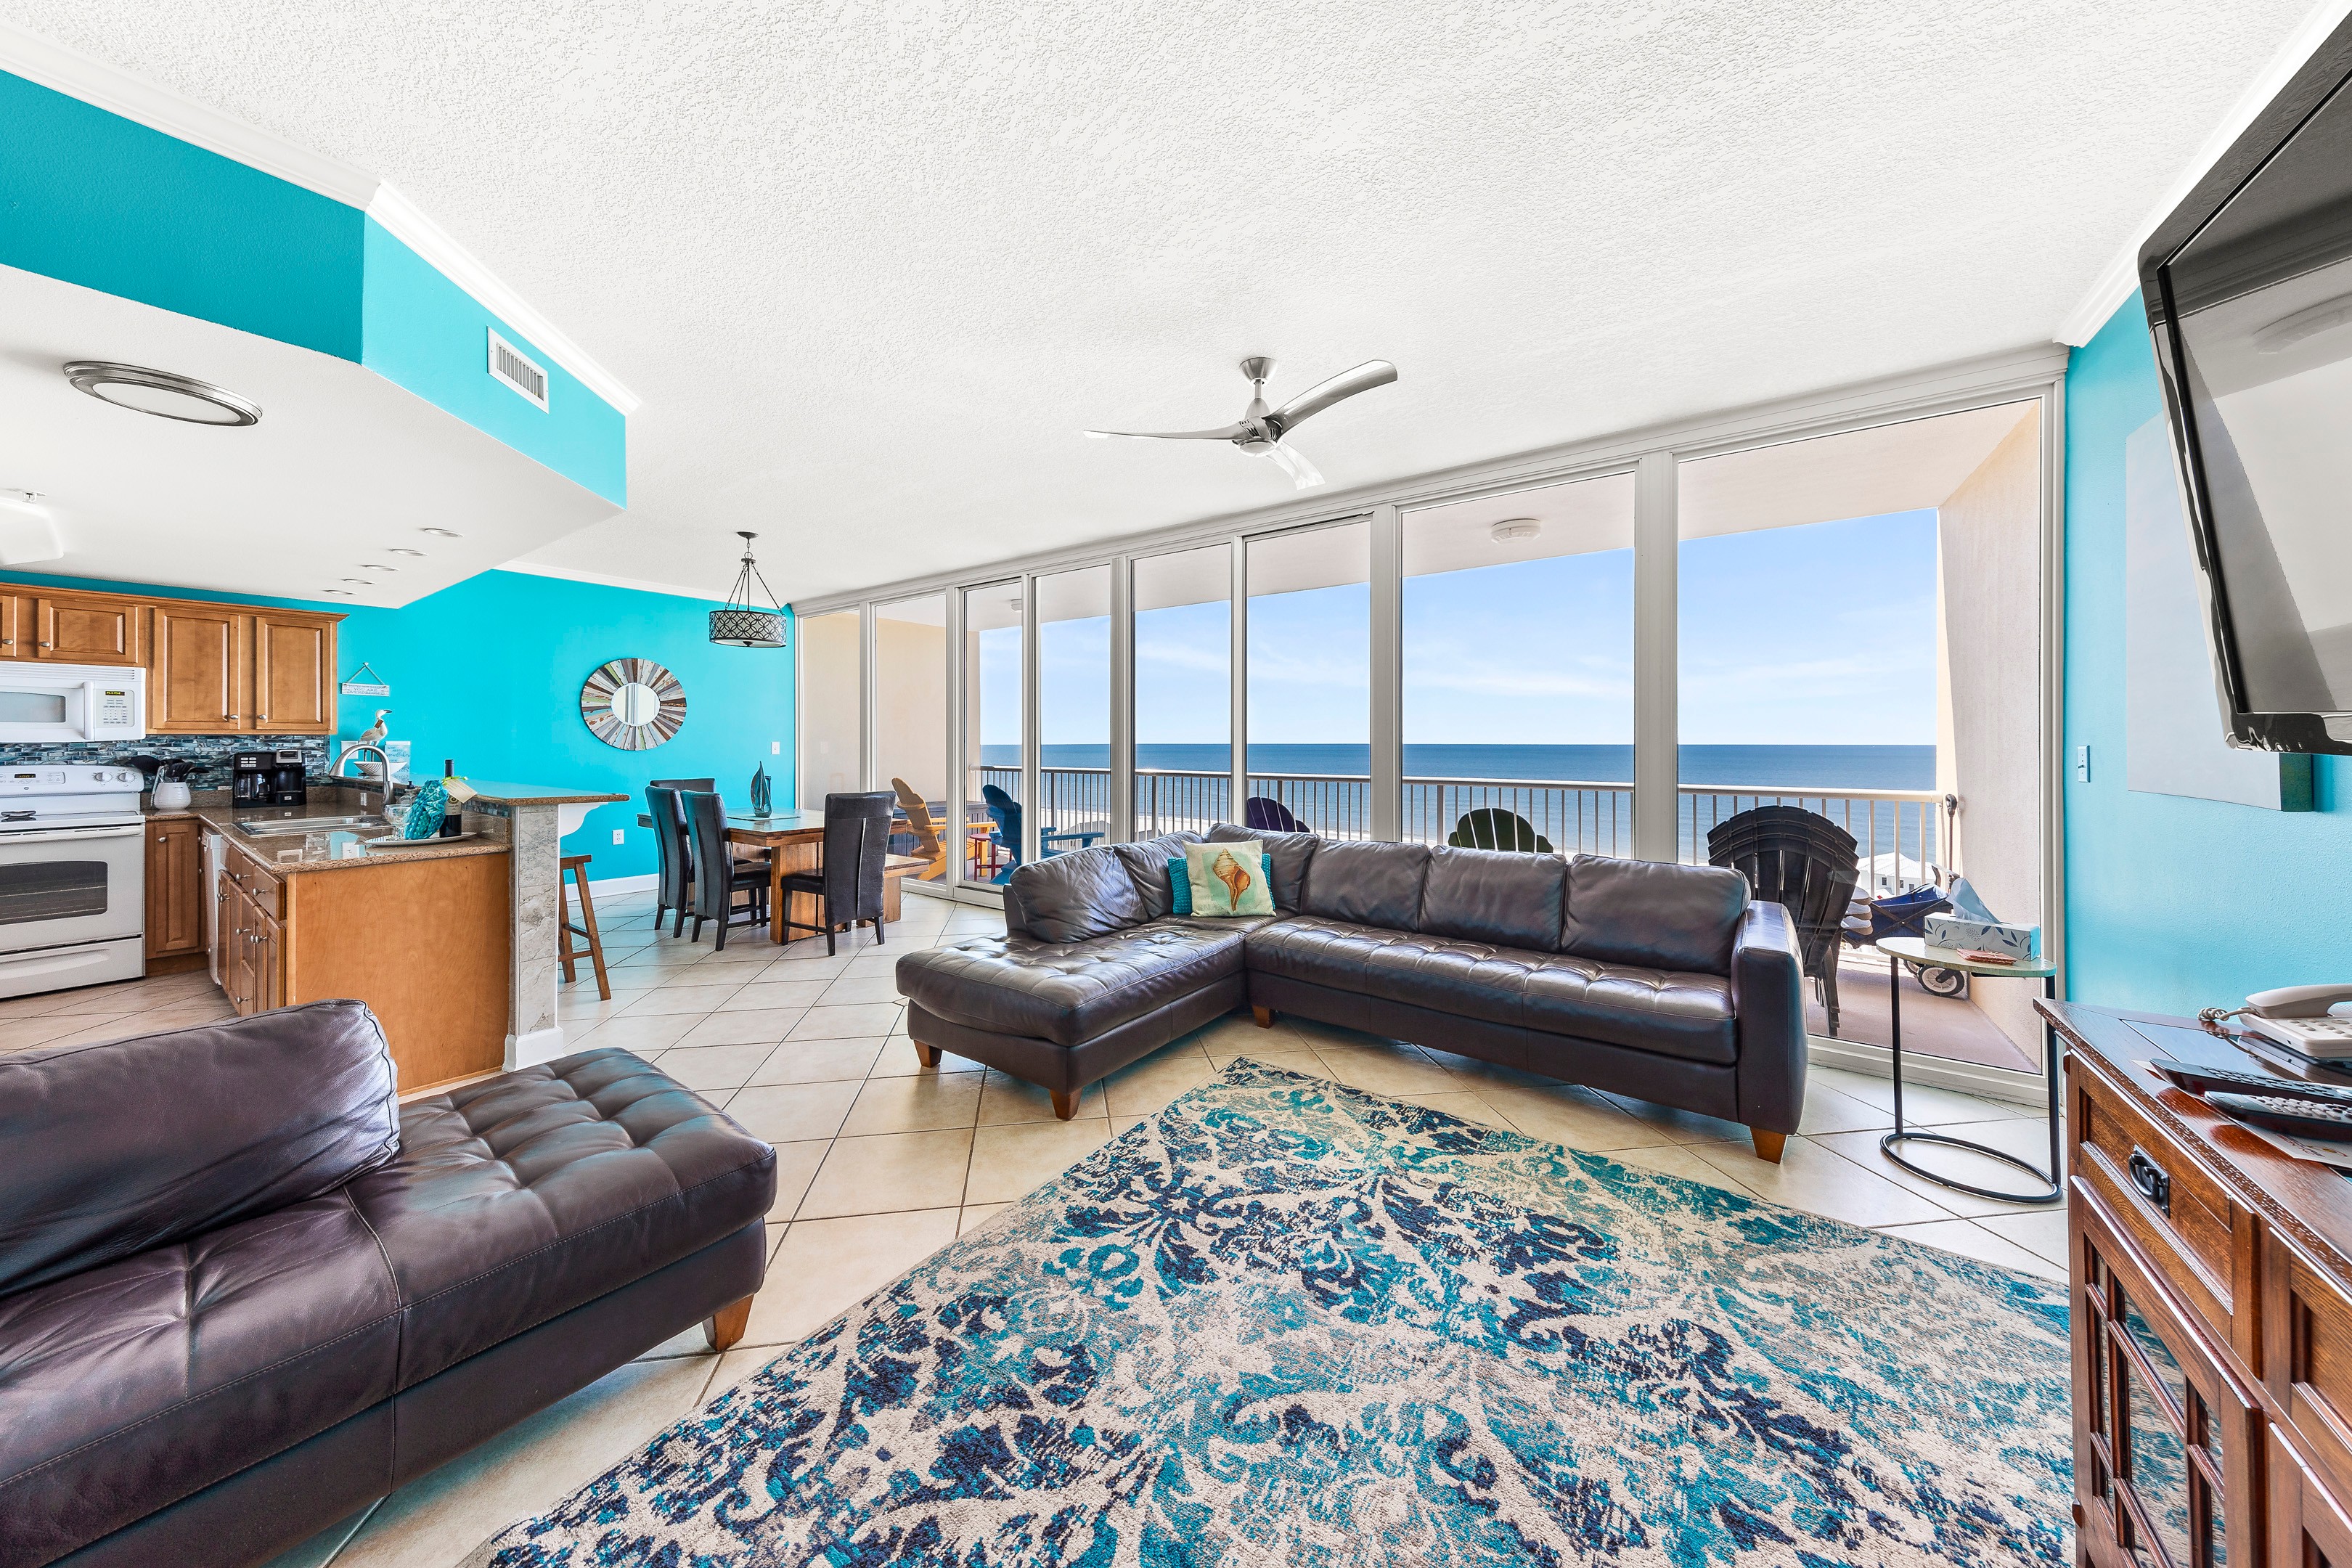 30 foot WALL OF GLASS gives you a great view of the Gulf from inside and the private balcony.